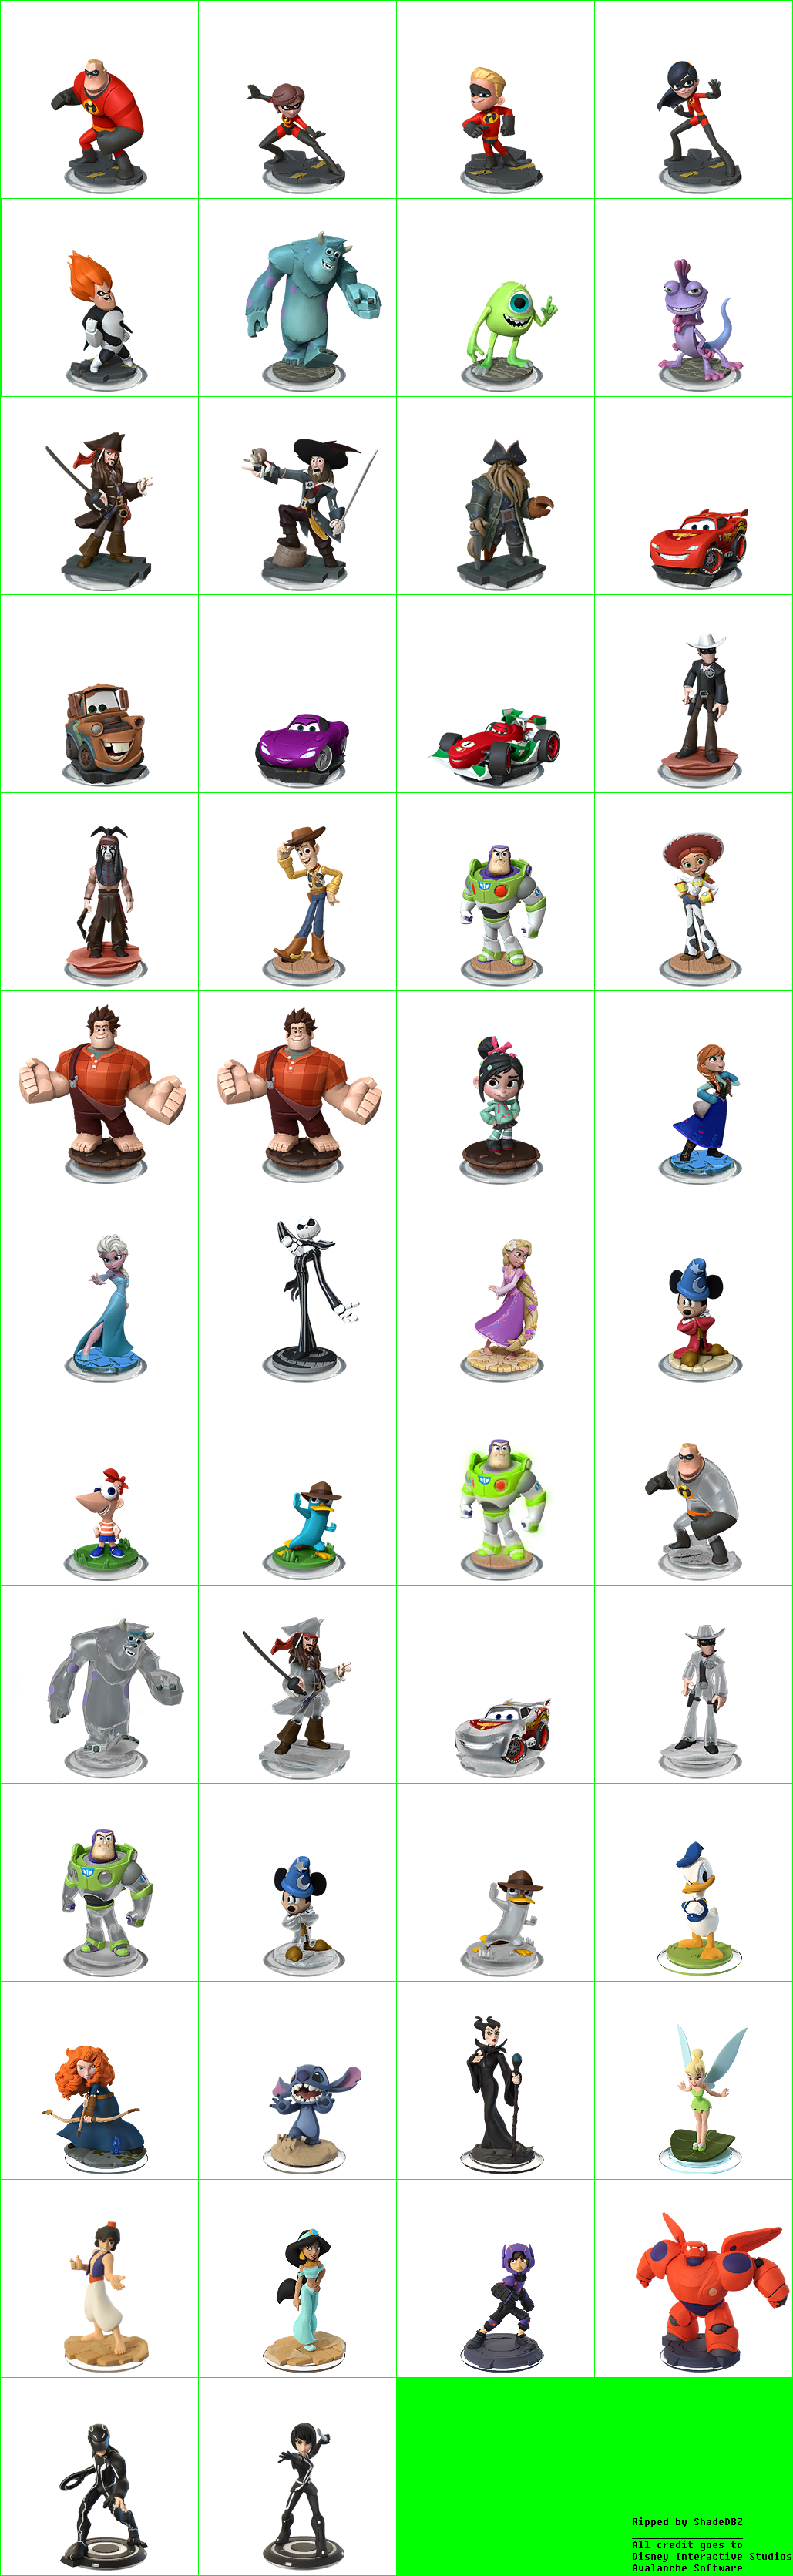 Disney Infinity 2.0 Edition: Marvel Super Heroes - Disney Character Previews (Small)